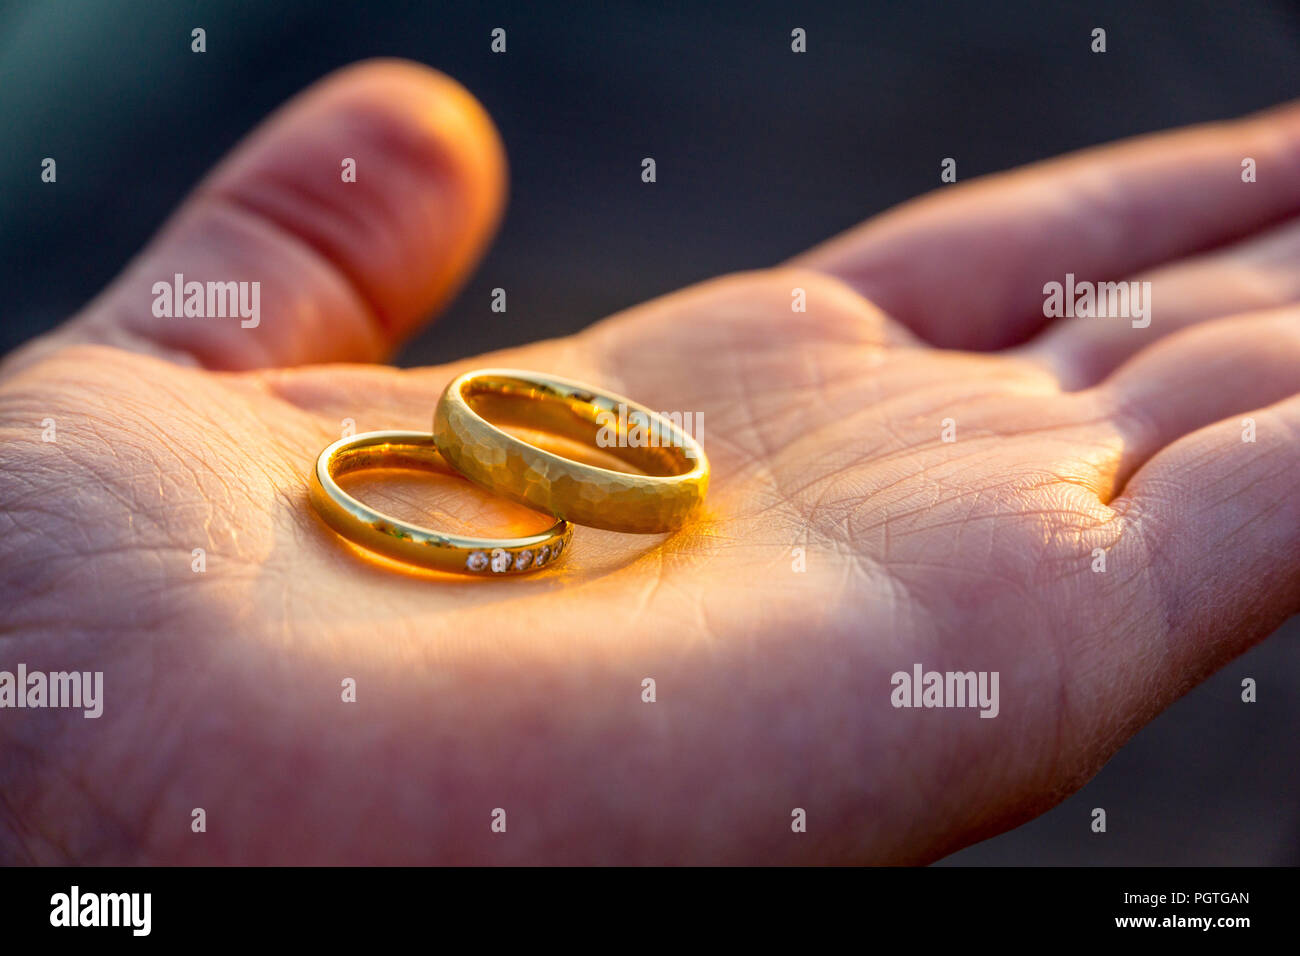 Hand holding two golden marriage rings as symbol for eternal love Stock Photo